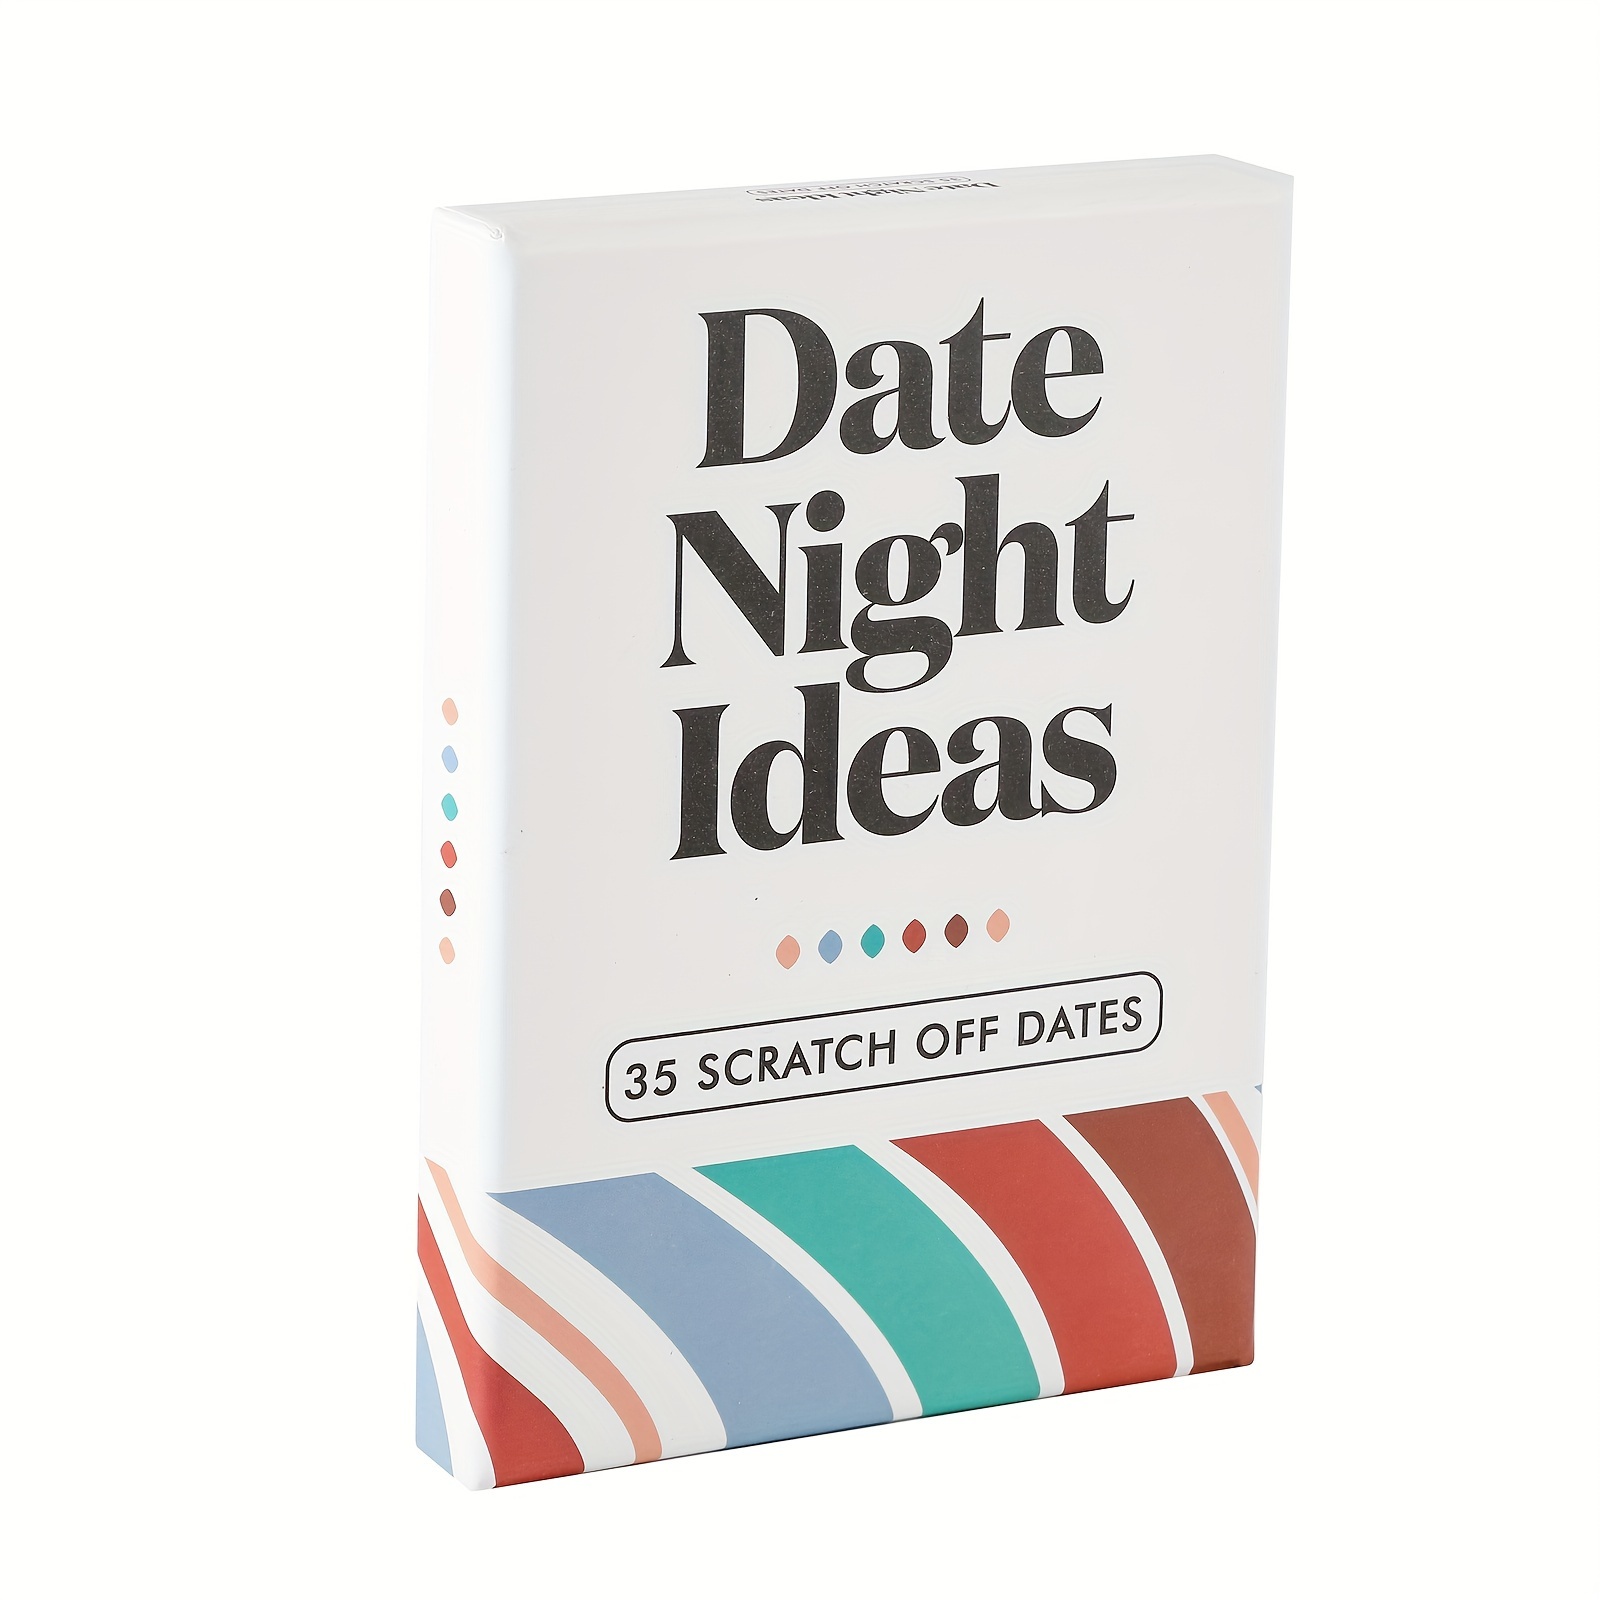 

Date Night Ideas For Couple Romantic Gift Fun Adventurous Card Game With Exciting Date Scratch Off The Card Ideas For Couple Girlfriend Boyfriend Newlywed Wife Or Husband